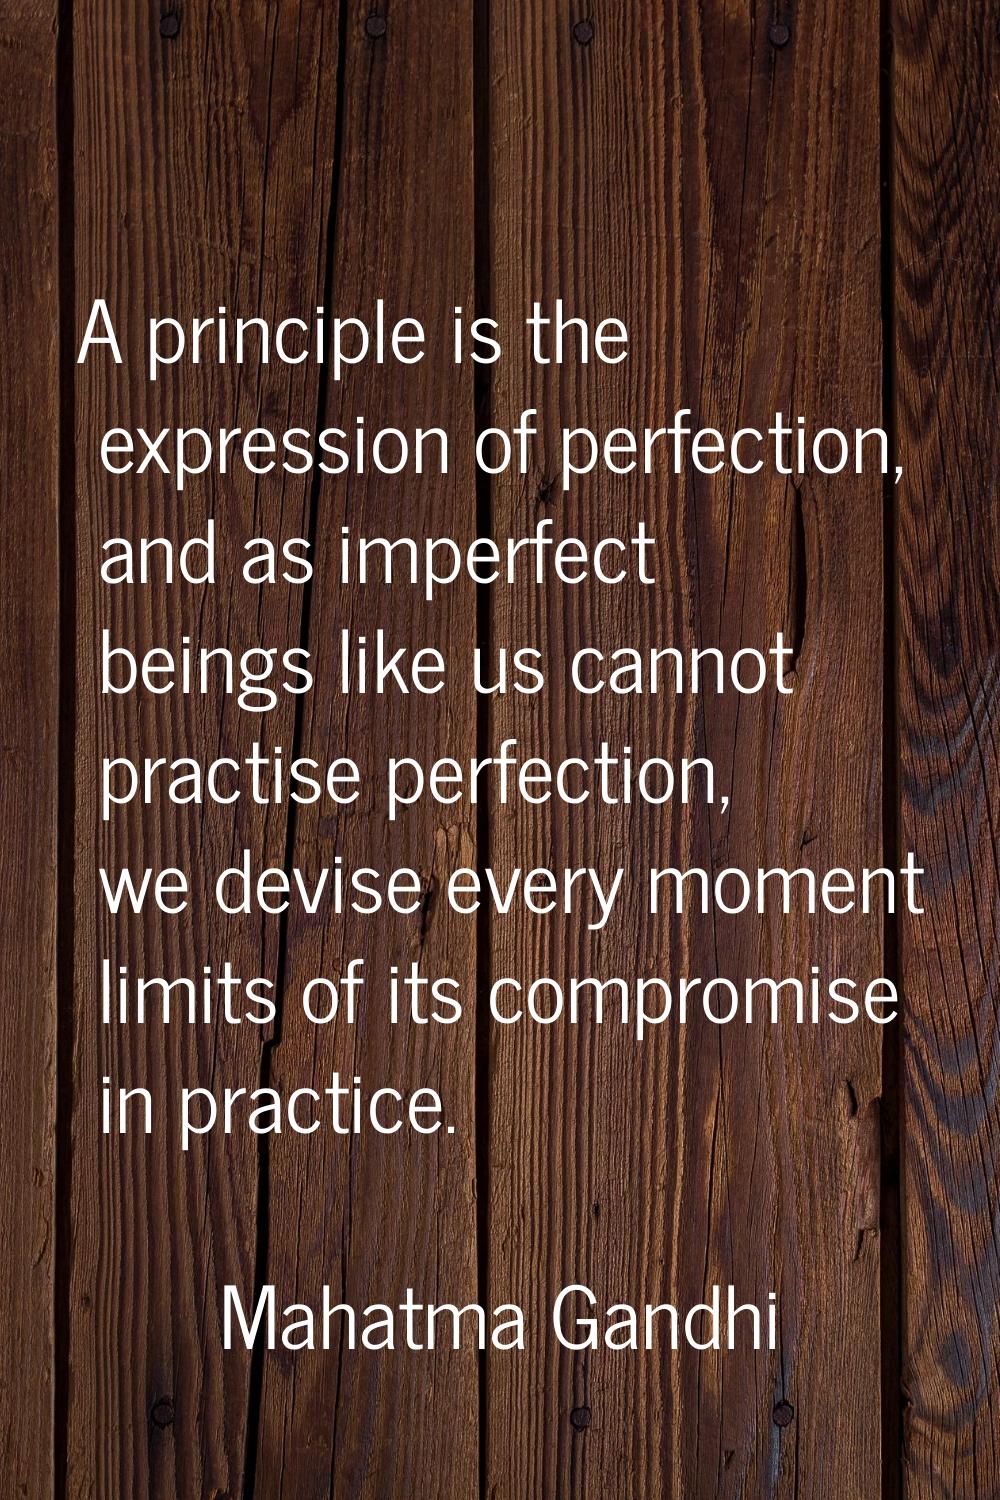 A principle is the expression of perfection, and as imperfect beings like us cannot practise perfec